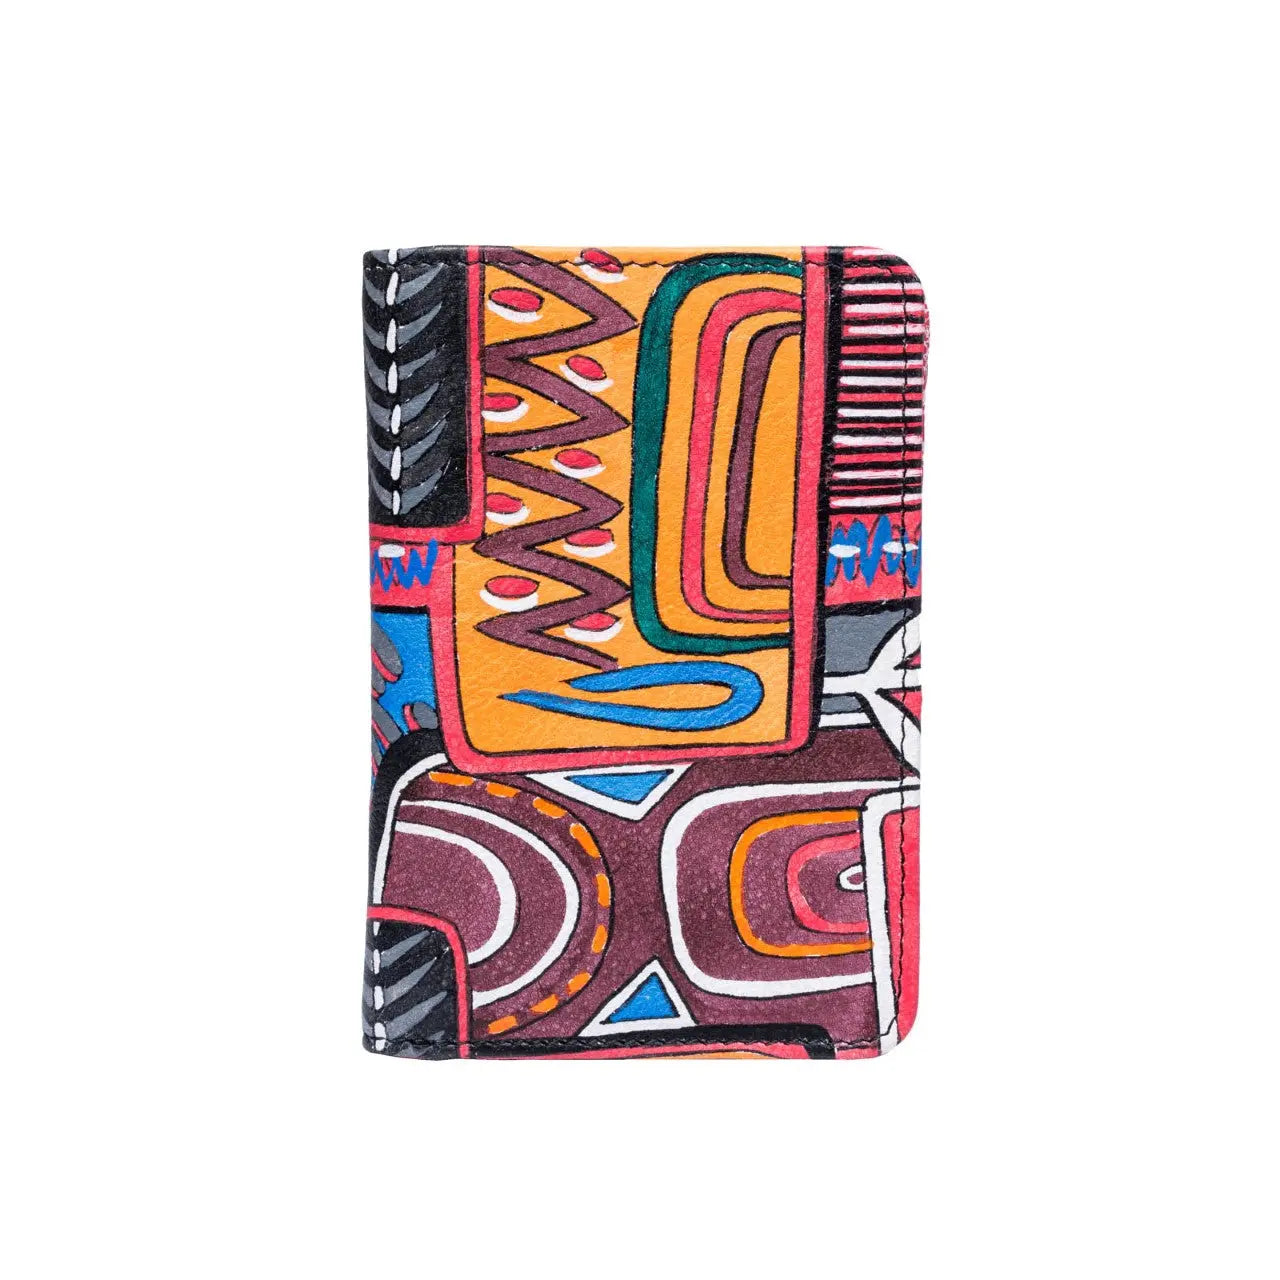 African colors -  - 66.00 | Sixth Edition